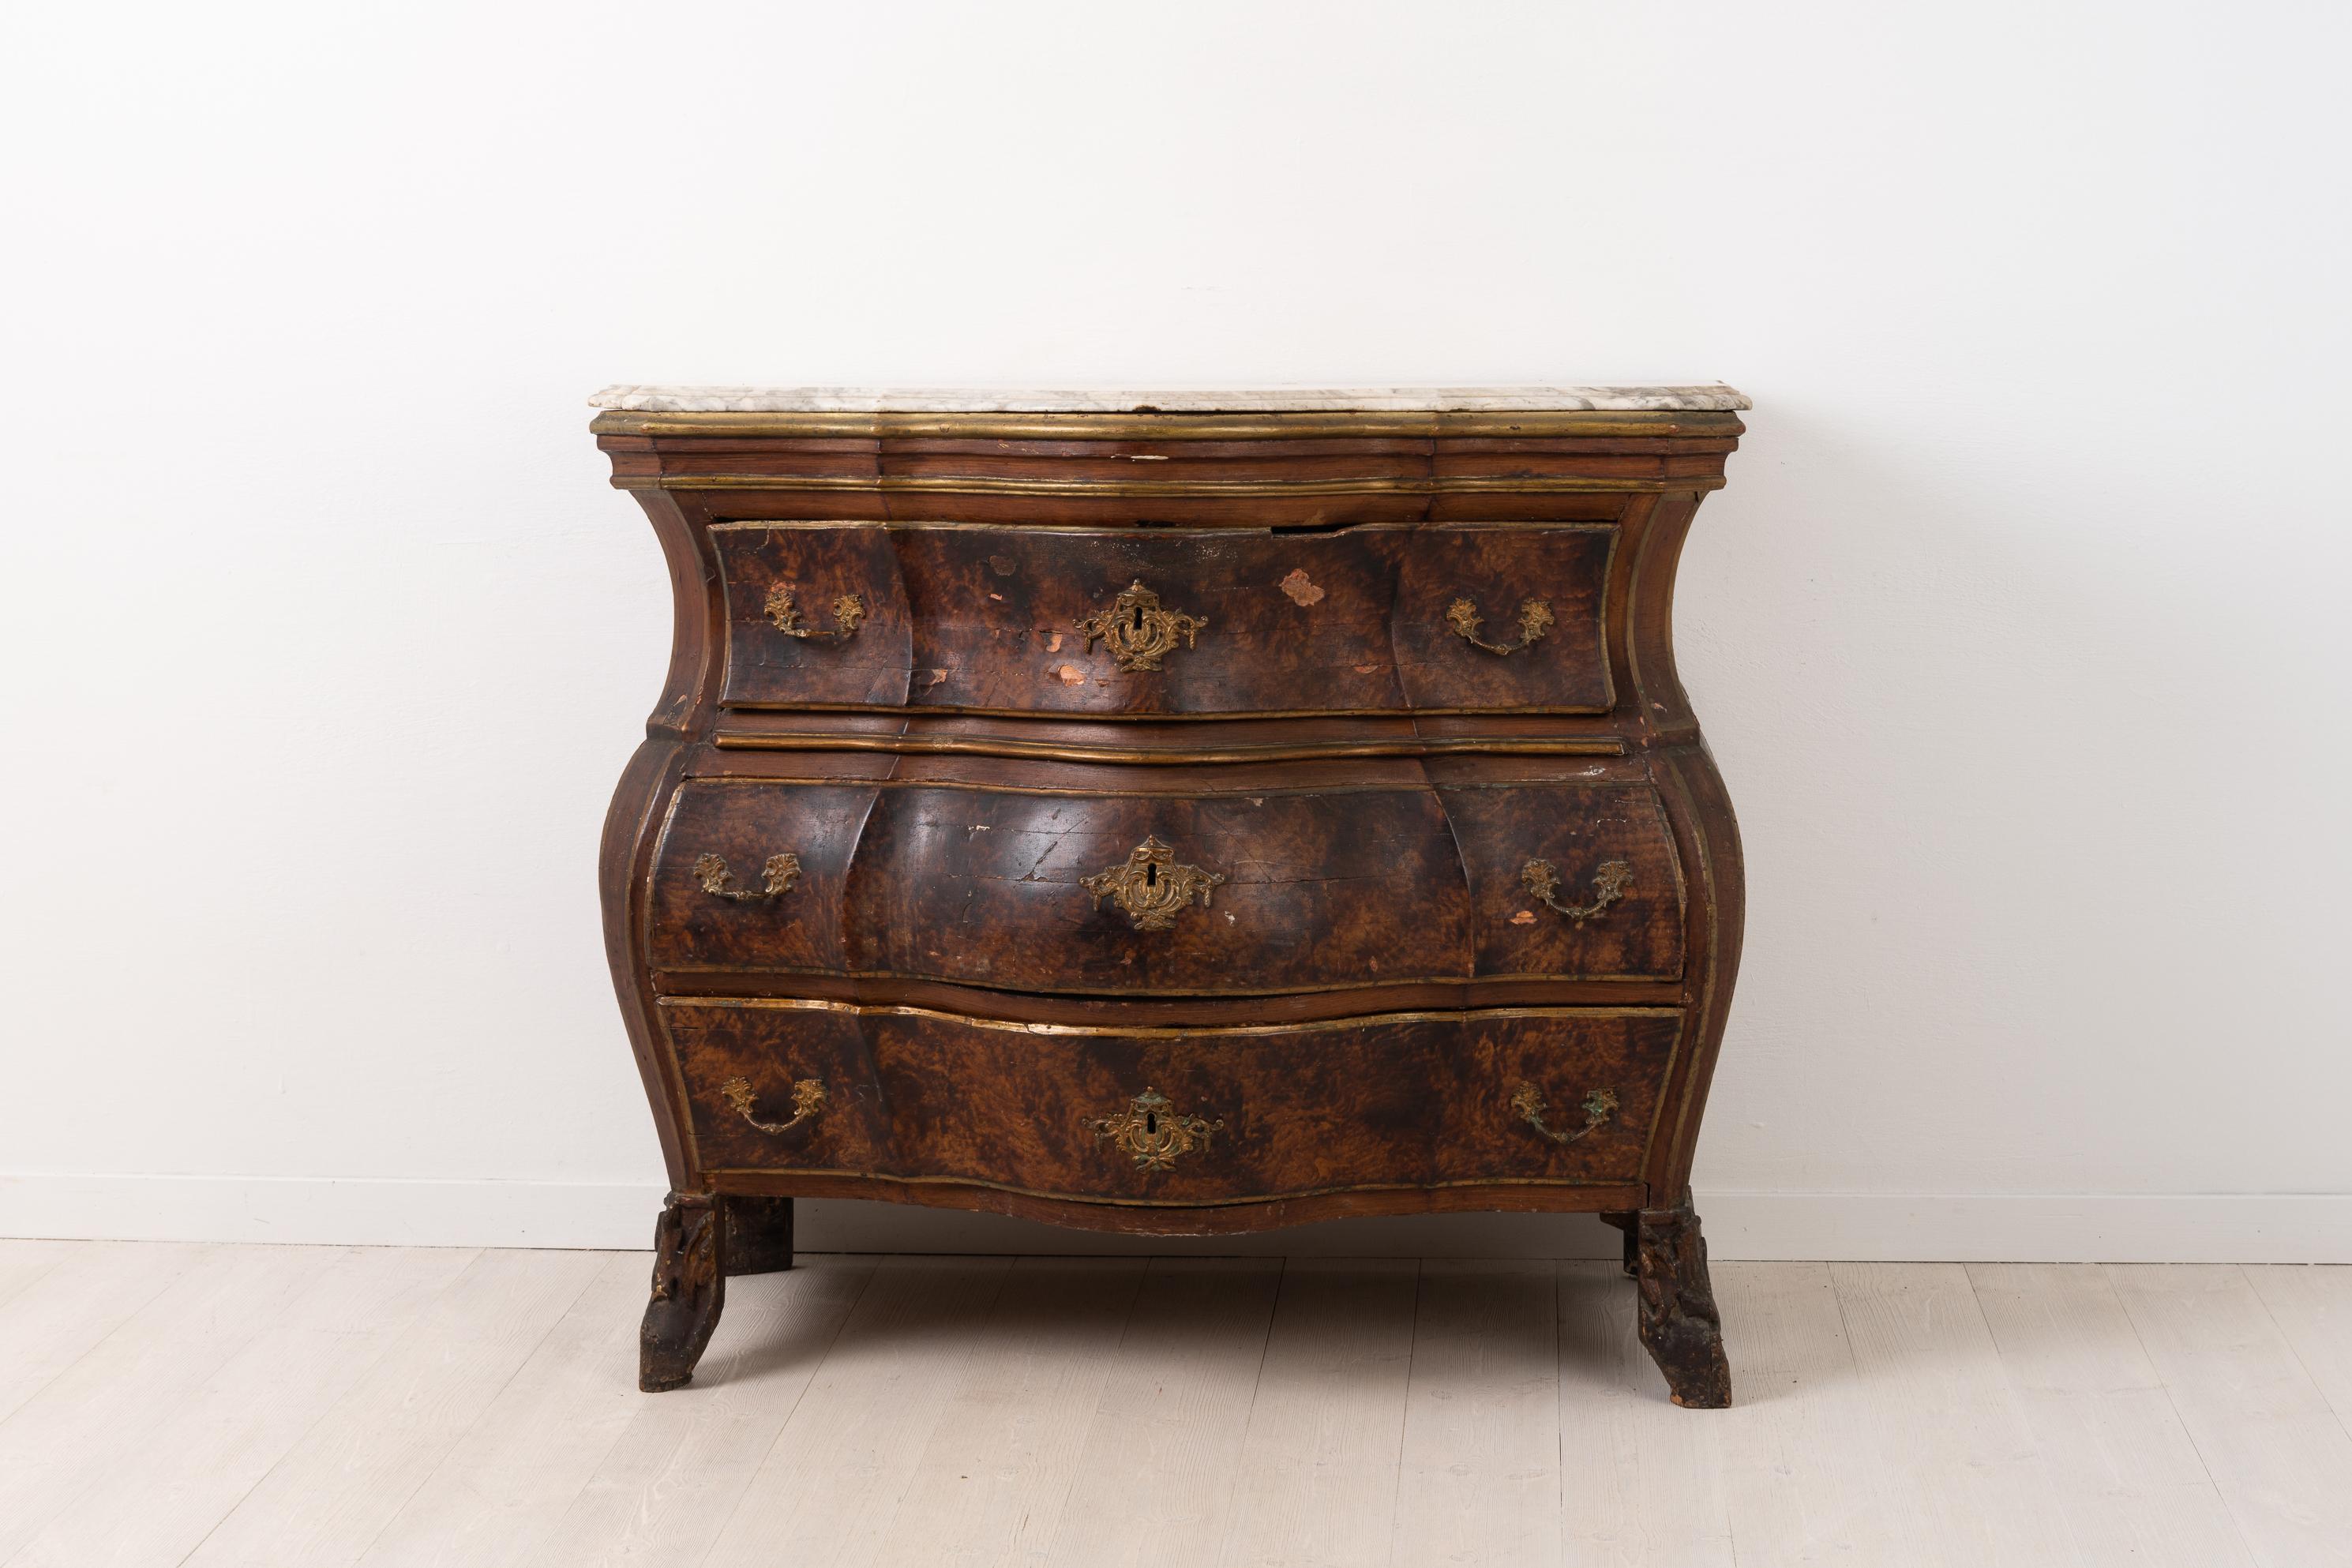 18th century chest of drawers from northern Sweden. The chest is Rococo with pronounced and curved sides and front. The profile is characteristic for the Rococo era and this is an authentic 250 year old example. It is painted with imitation paint